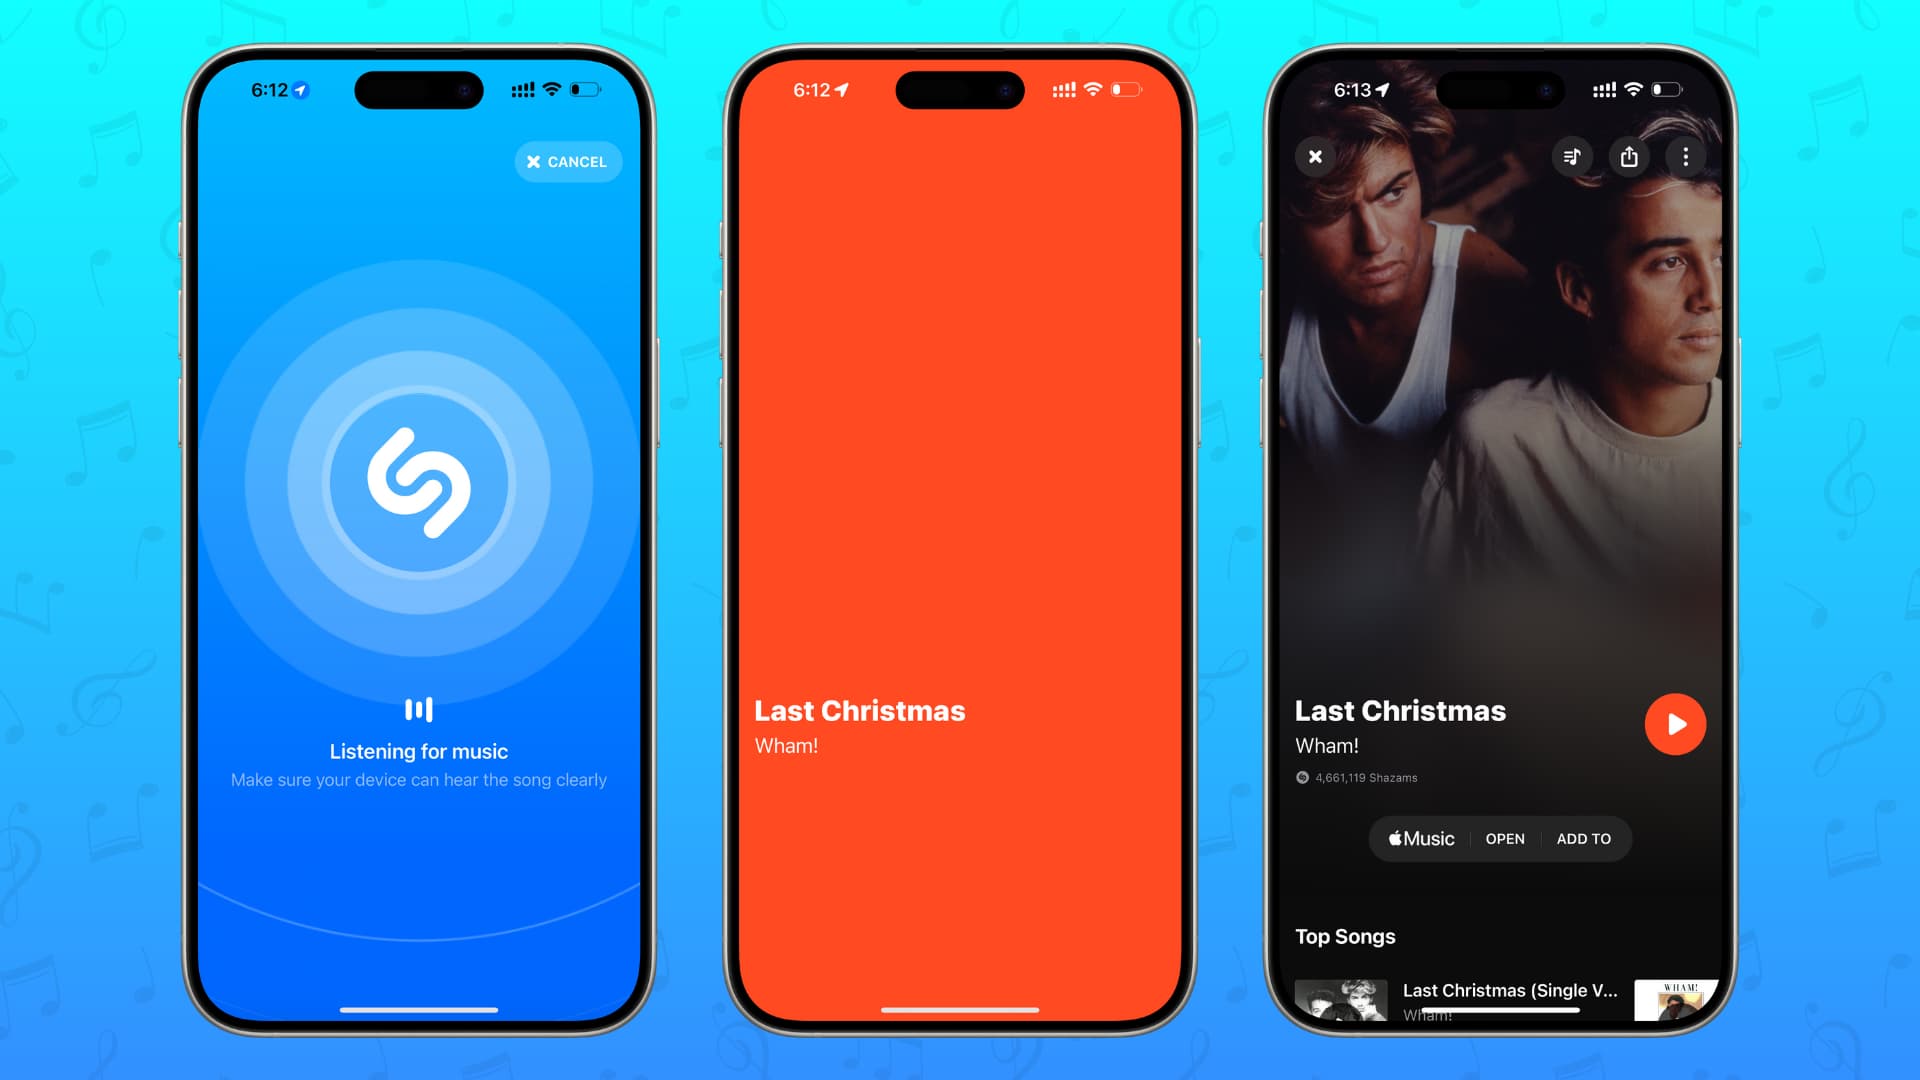 How to use Shazam to identify songs on any device